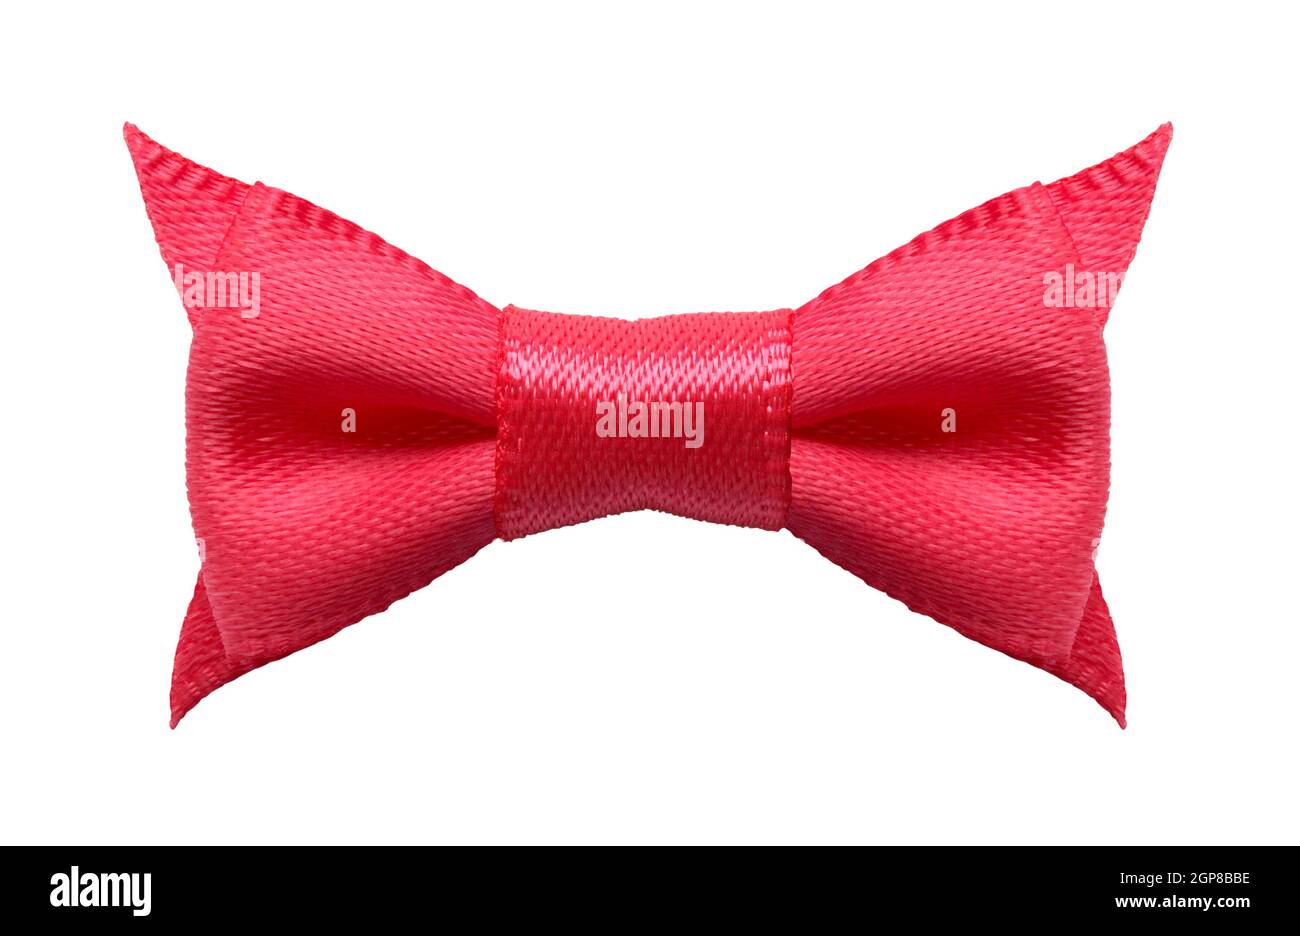 Red Bow Tie Cut Out on White. Stock Photo